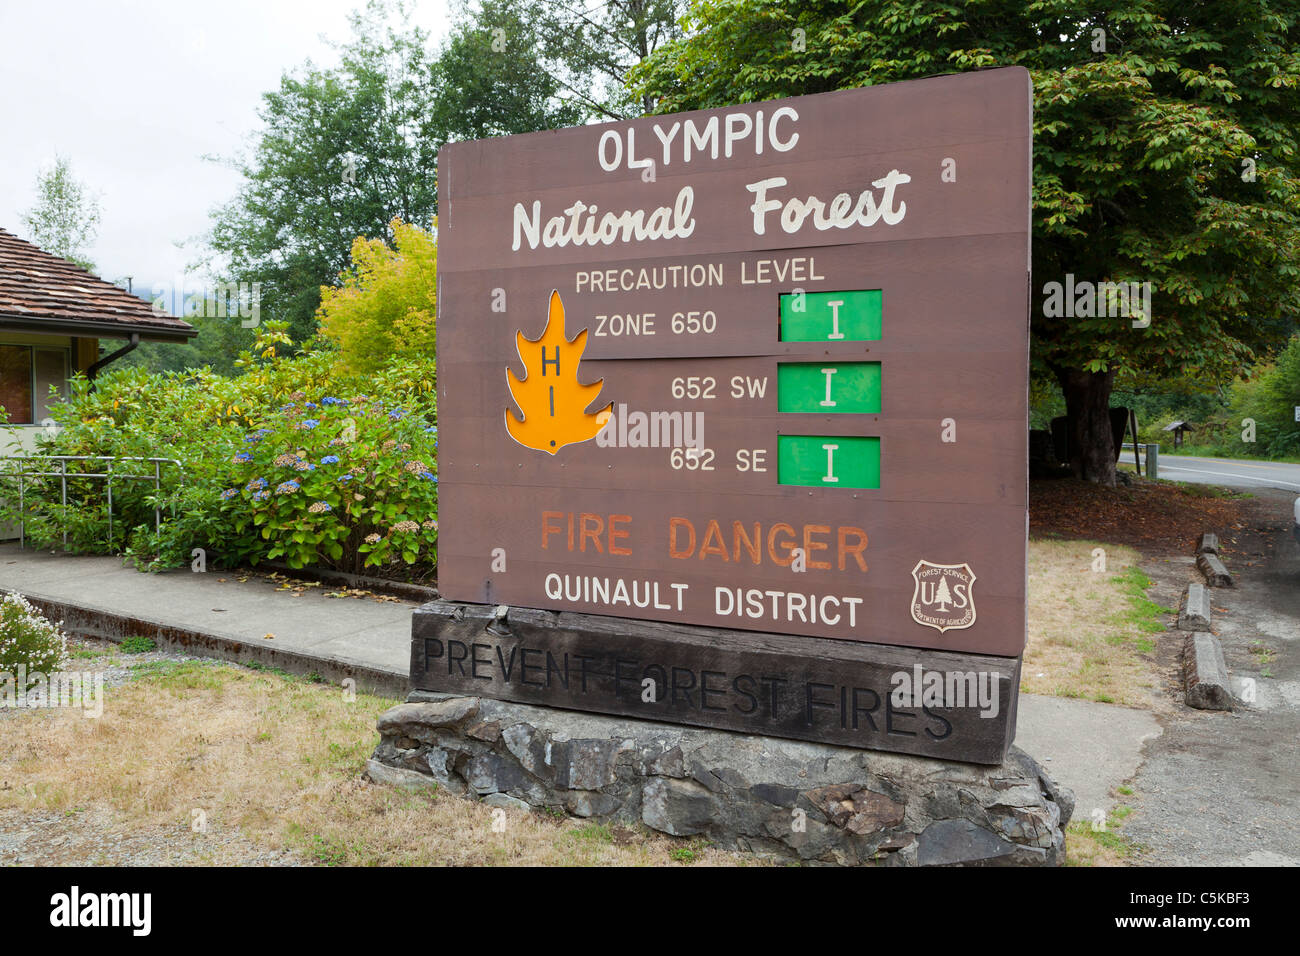 Olympic National Park Fire precaution level sign Quinault District Washington USA Stock Photo